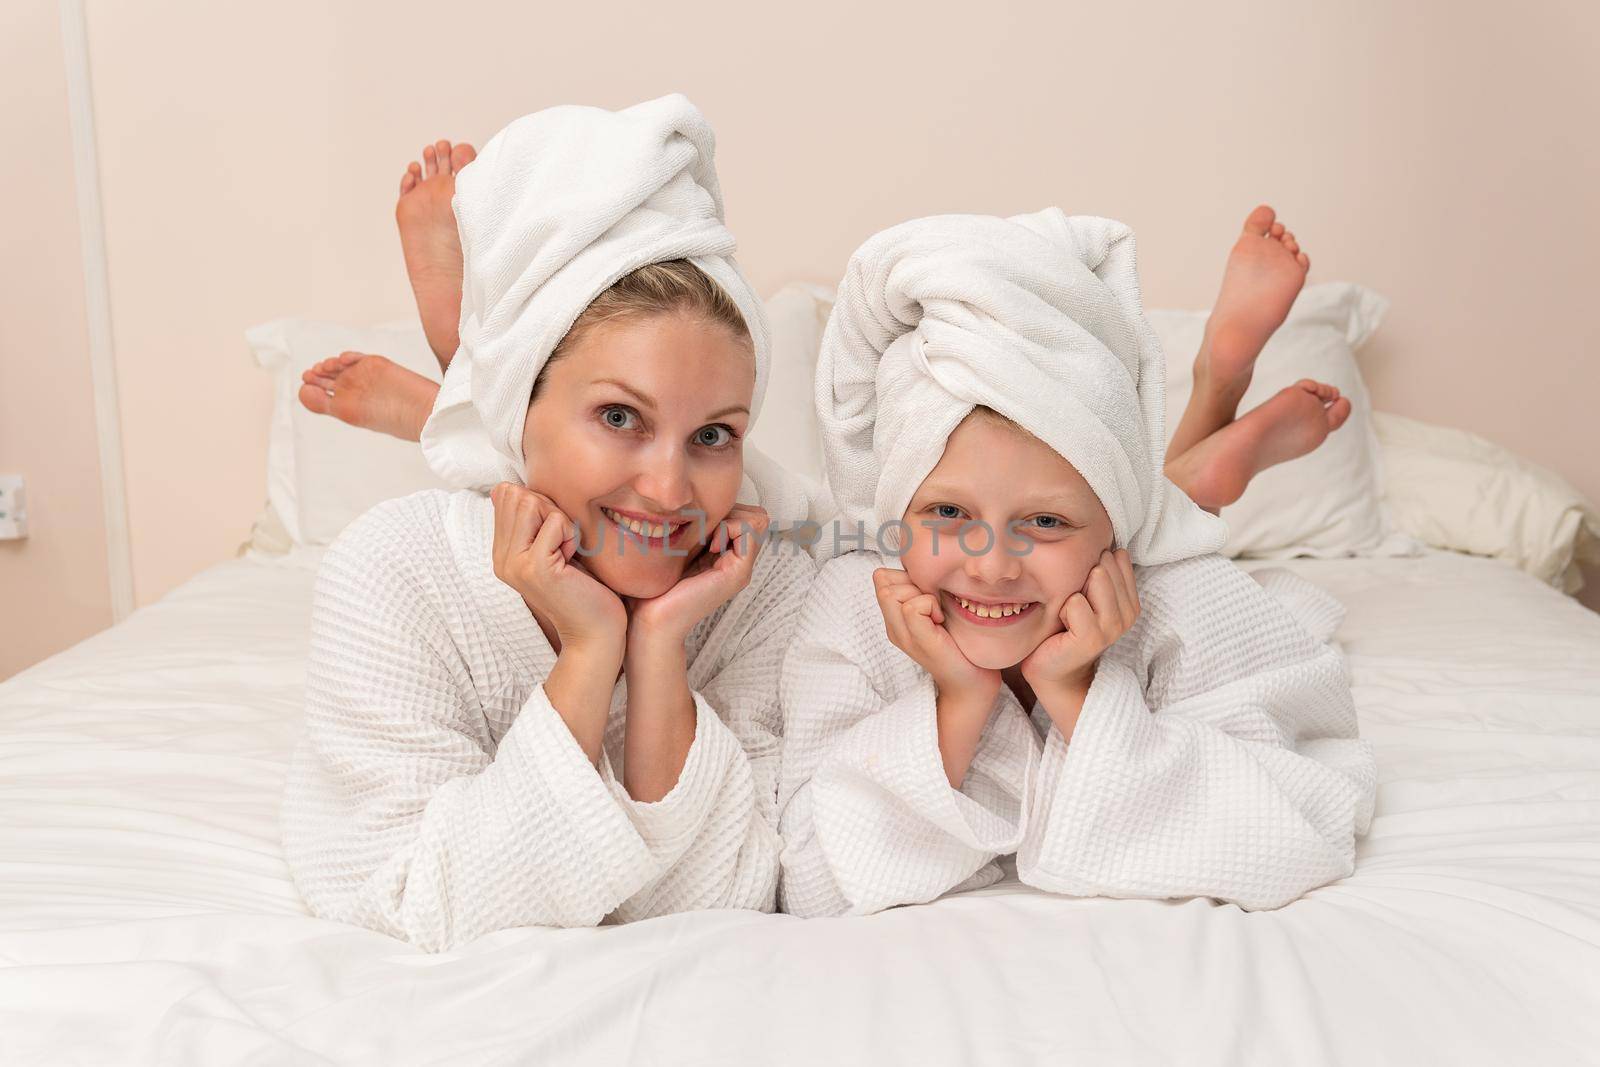 Daughter dries bath mom love smiling thinks elbows Creek copyspace, for portrait cute in dressing and happy spa, little background. Care funny fashion, by 89167702191